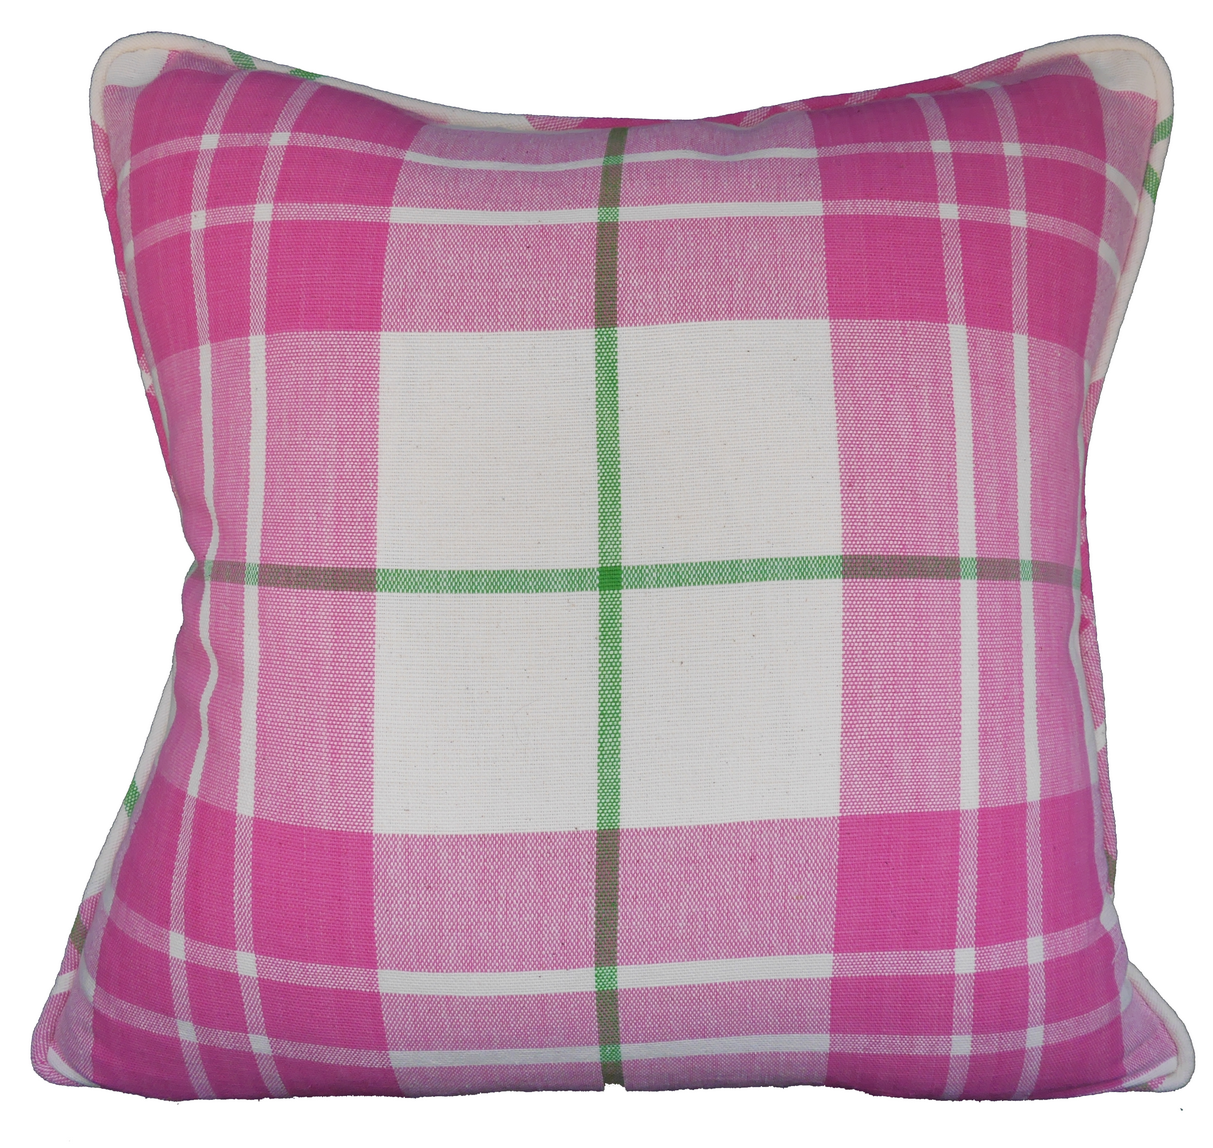 Saunders Check Throw Pillow - Pink & Green